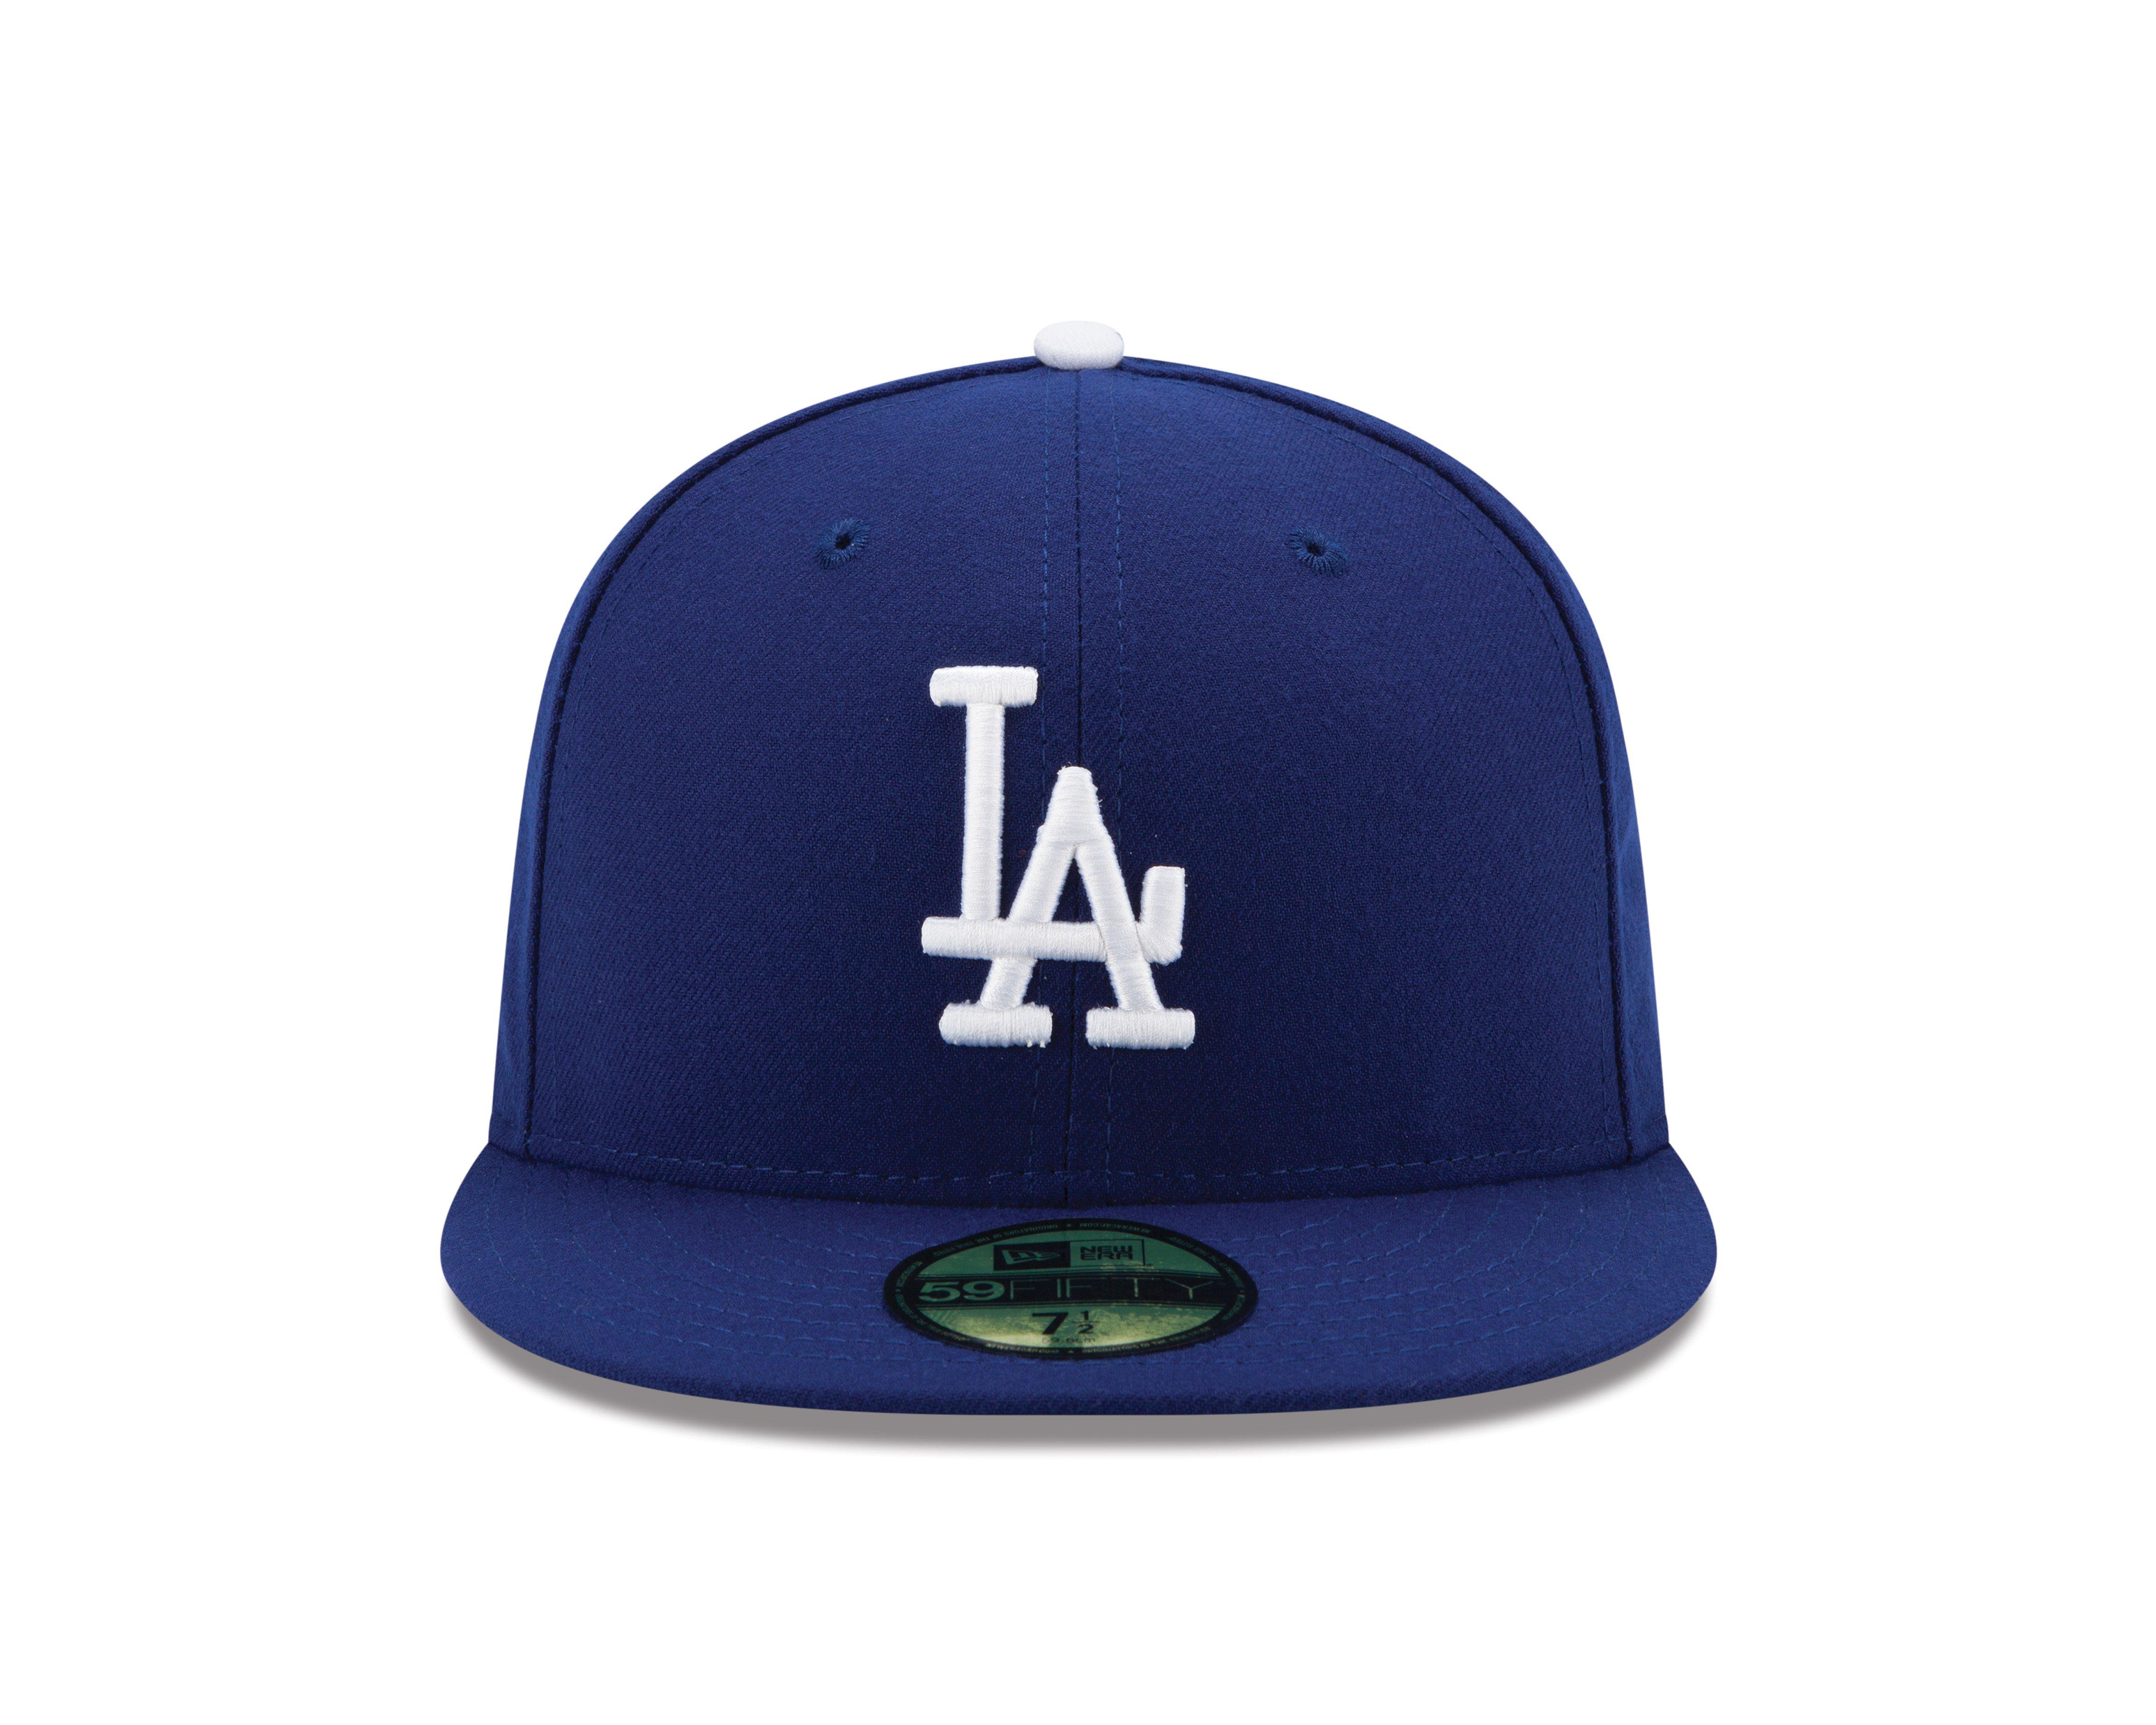 Los Angeles Dodgers With Blue And Black Background With White